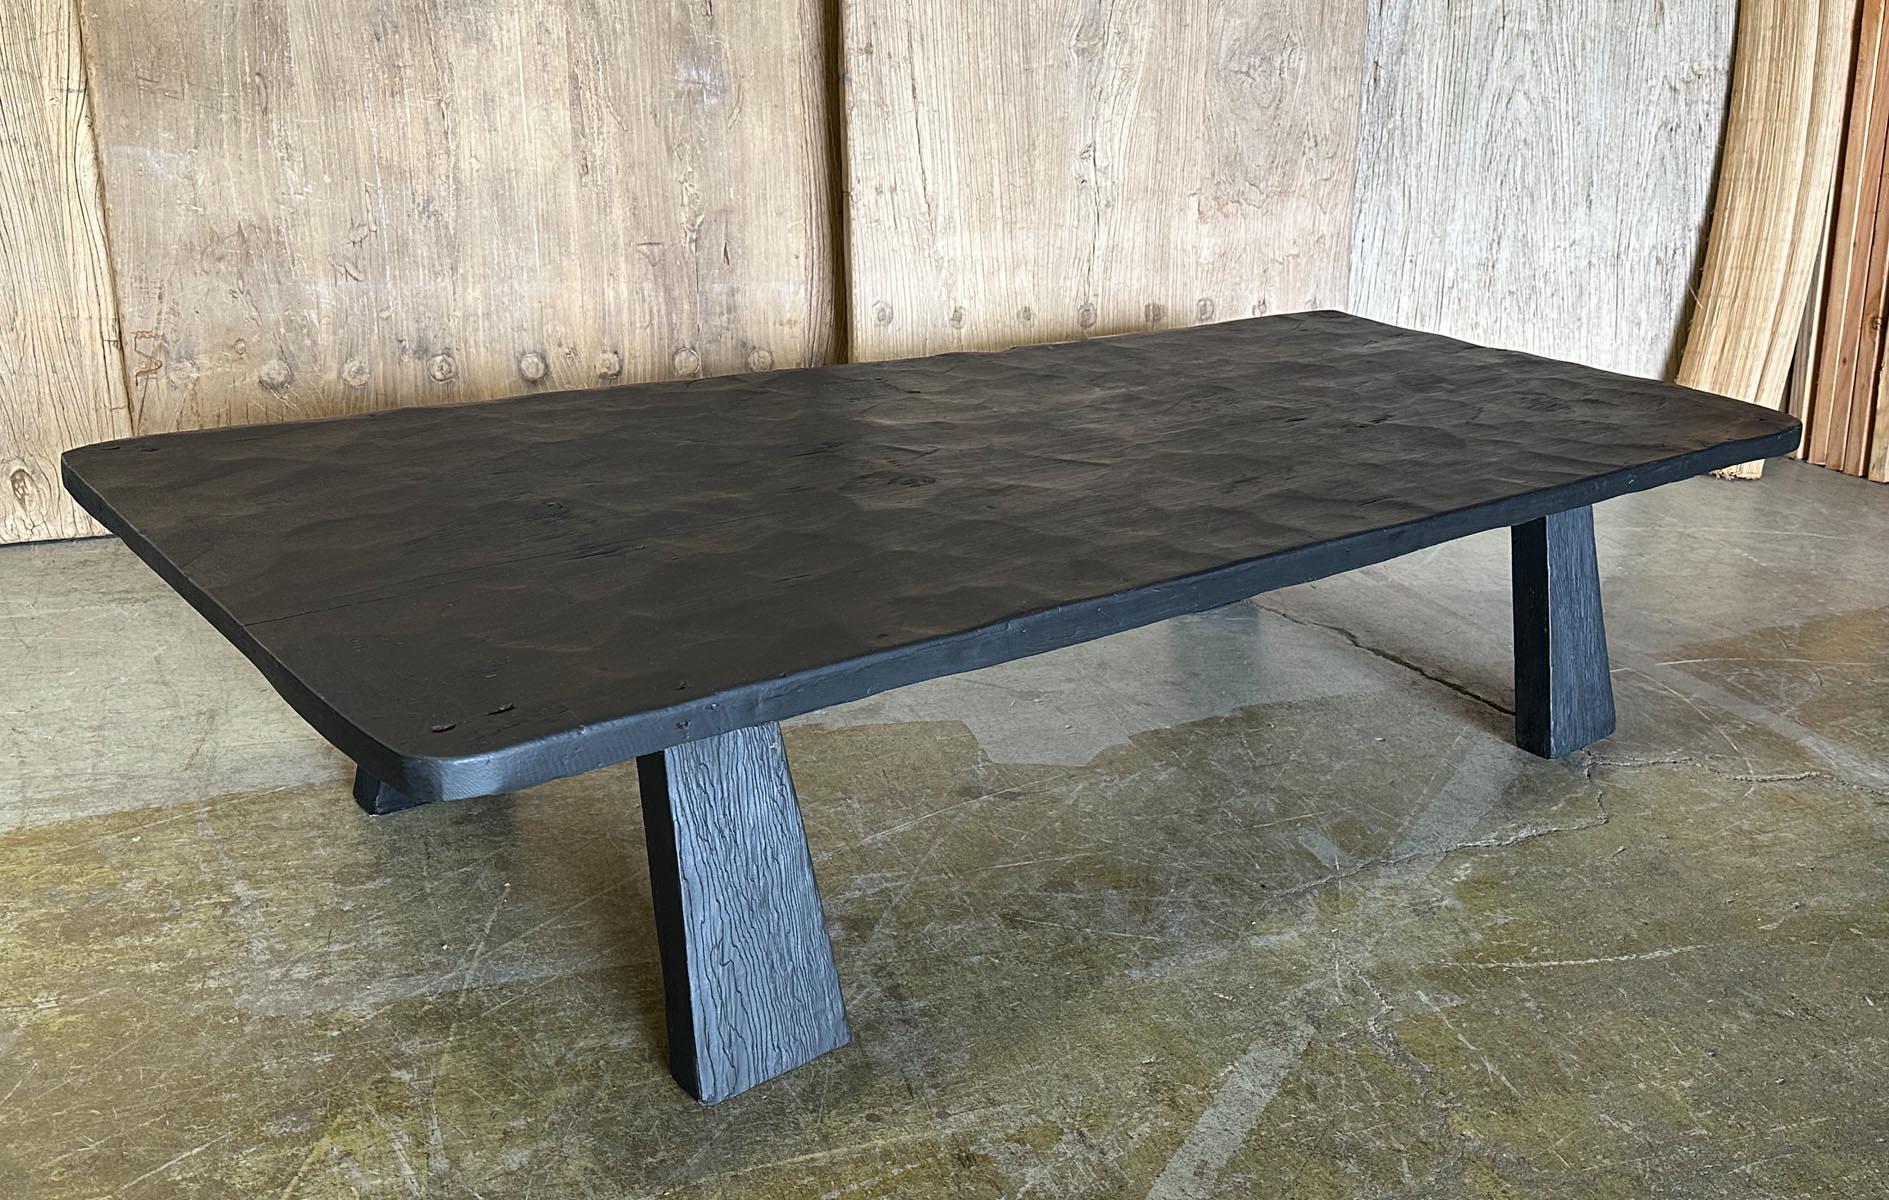 This coffee table consists of a 19th c, hand hewn (with a machete), one wide board top. The table has been refinished in a black finish, still allowing the natural wood and patina to show. It shows some age appropriate wear, but has a sturdy